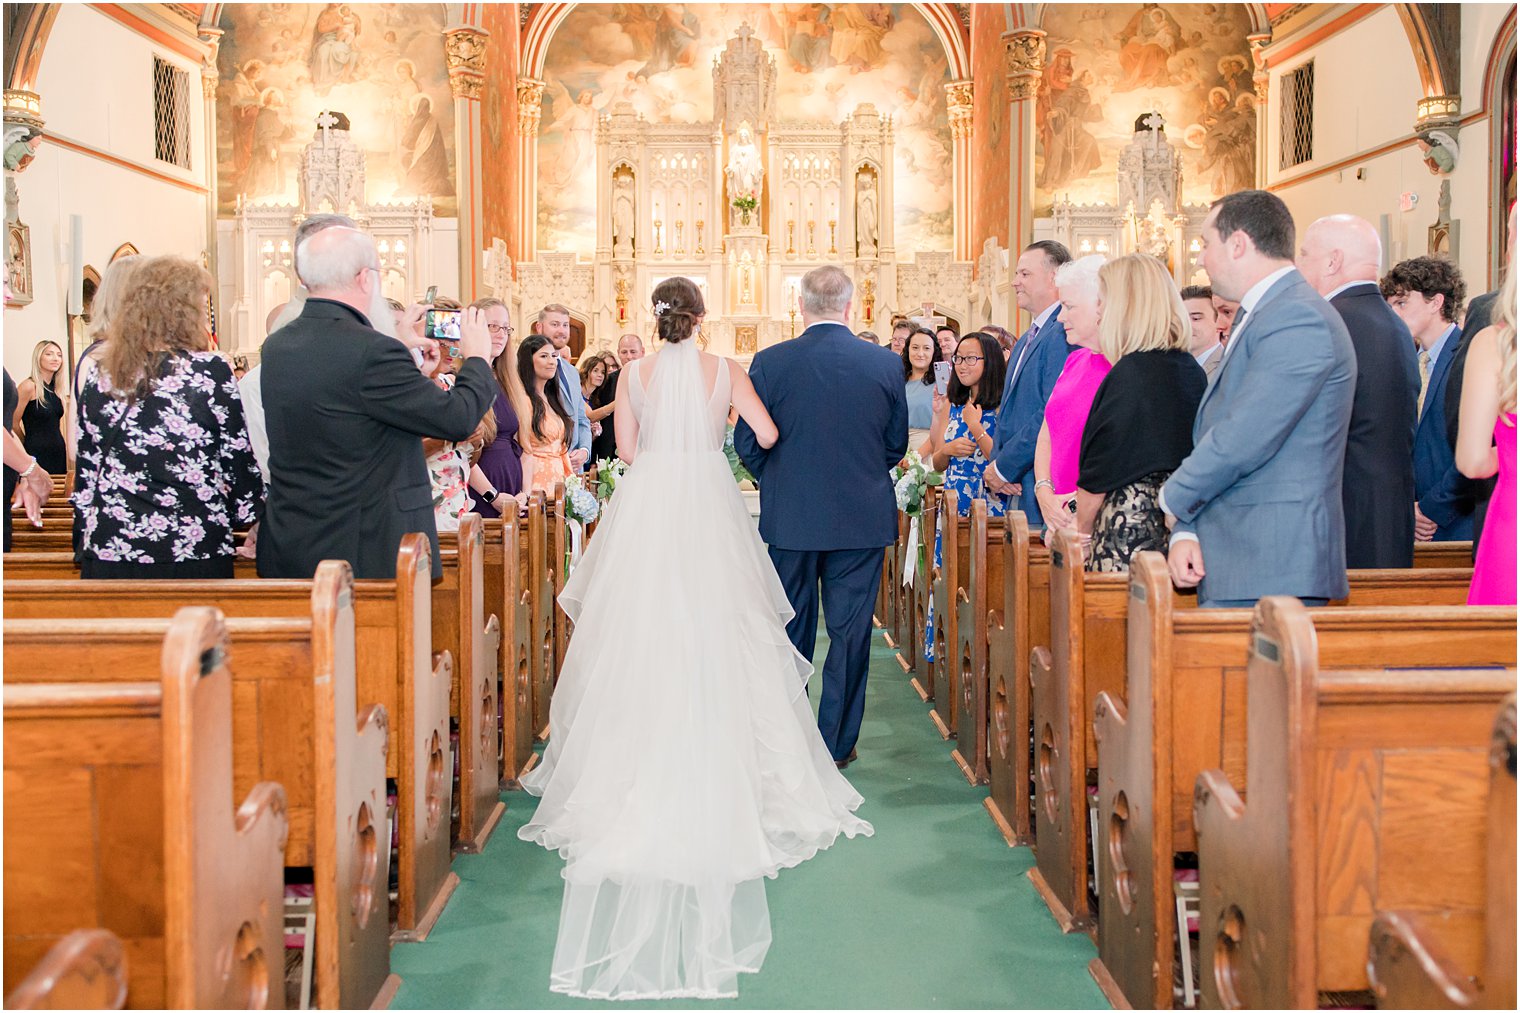 bride walks down aisle with father during traditional church wedding ceremony at St. Peter's Church